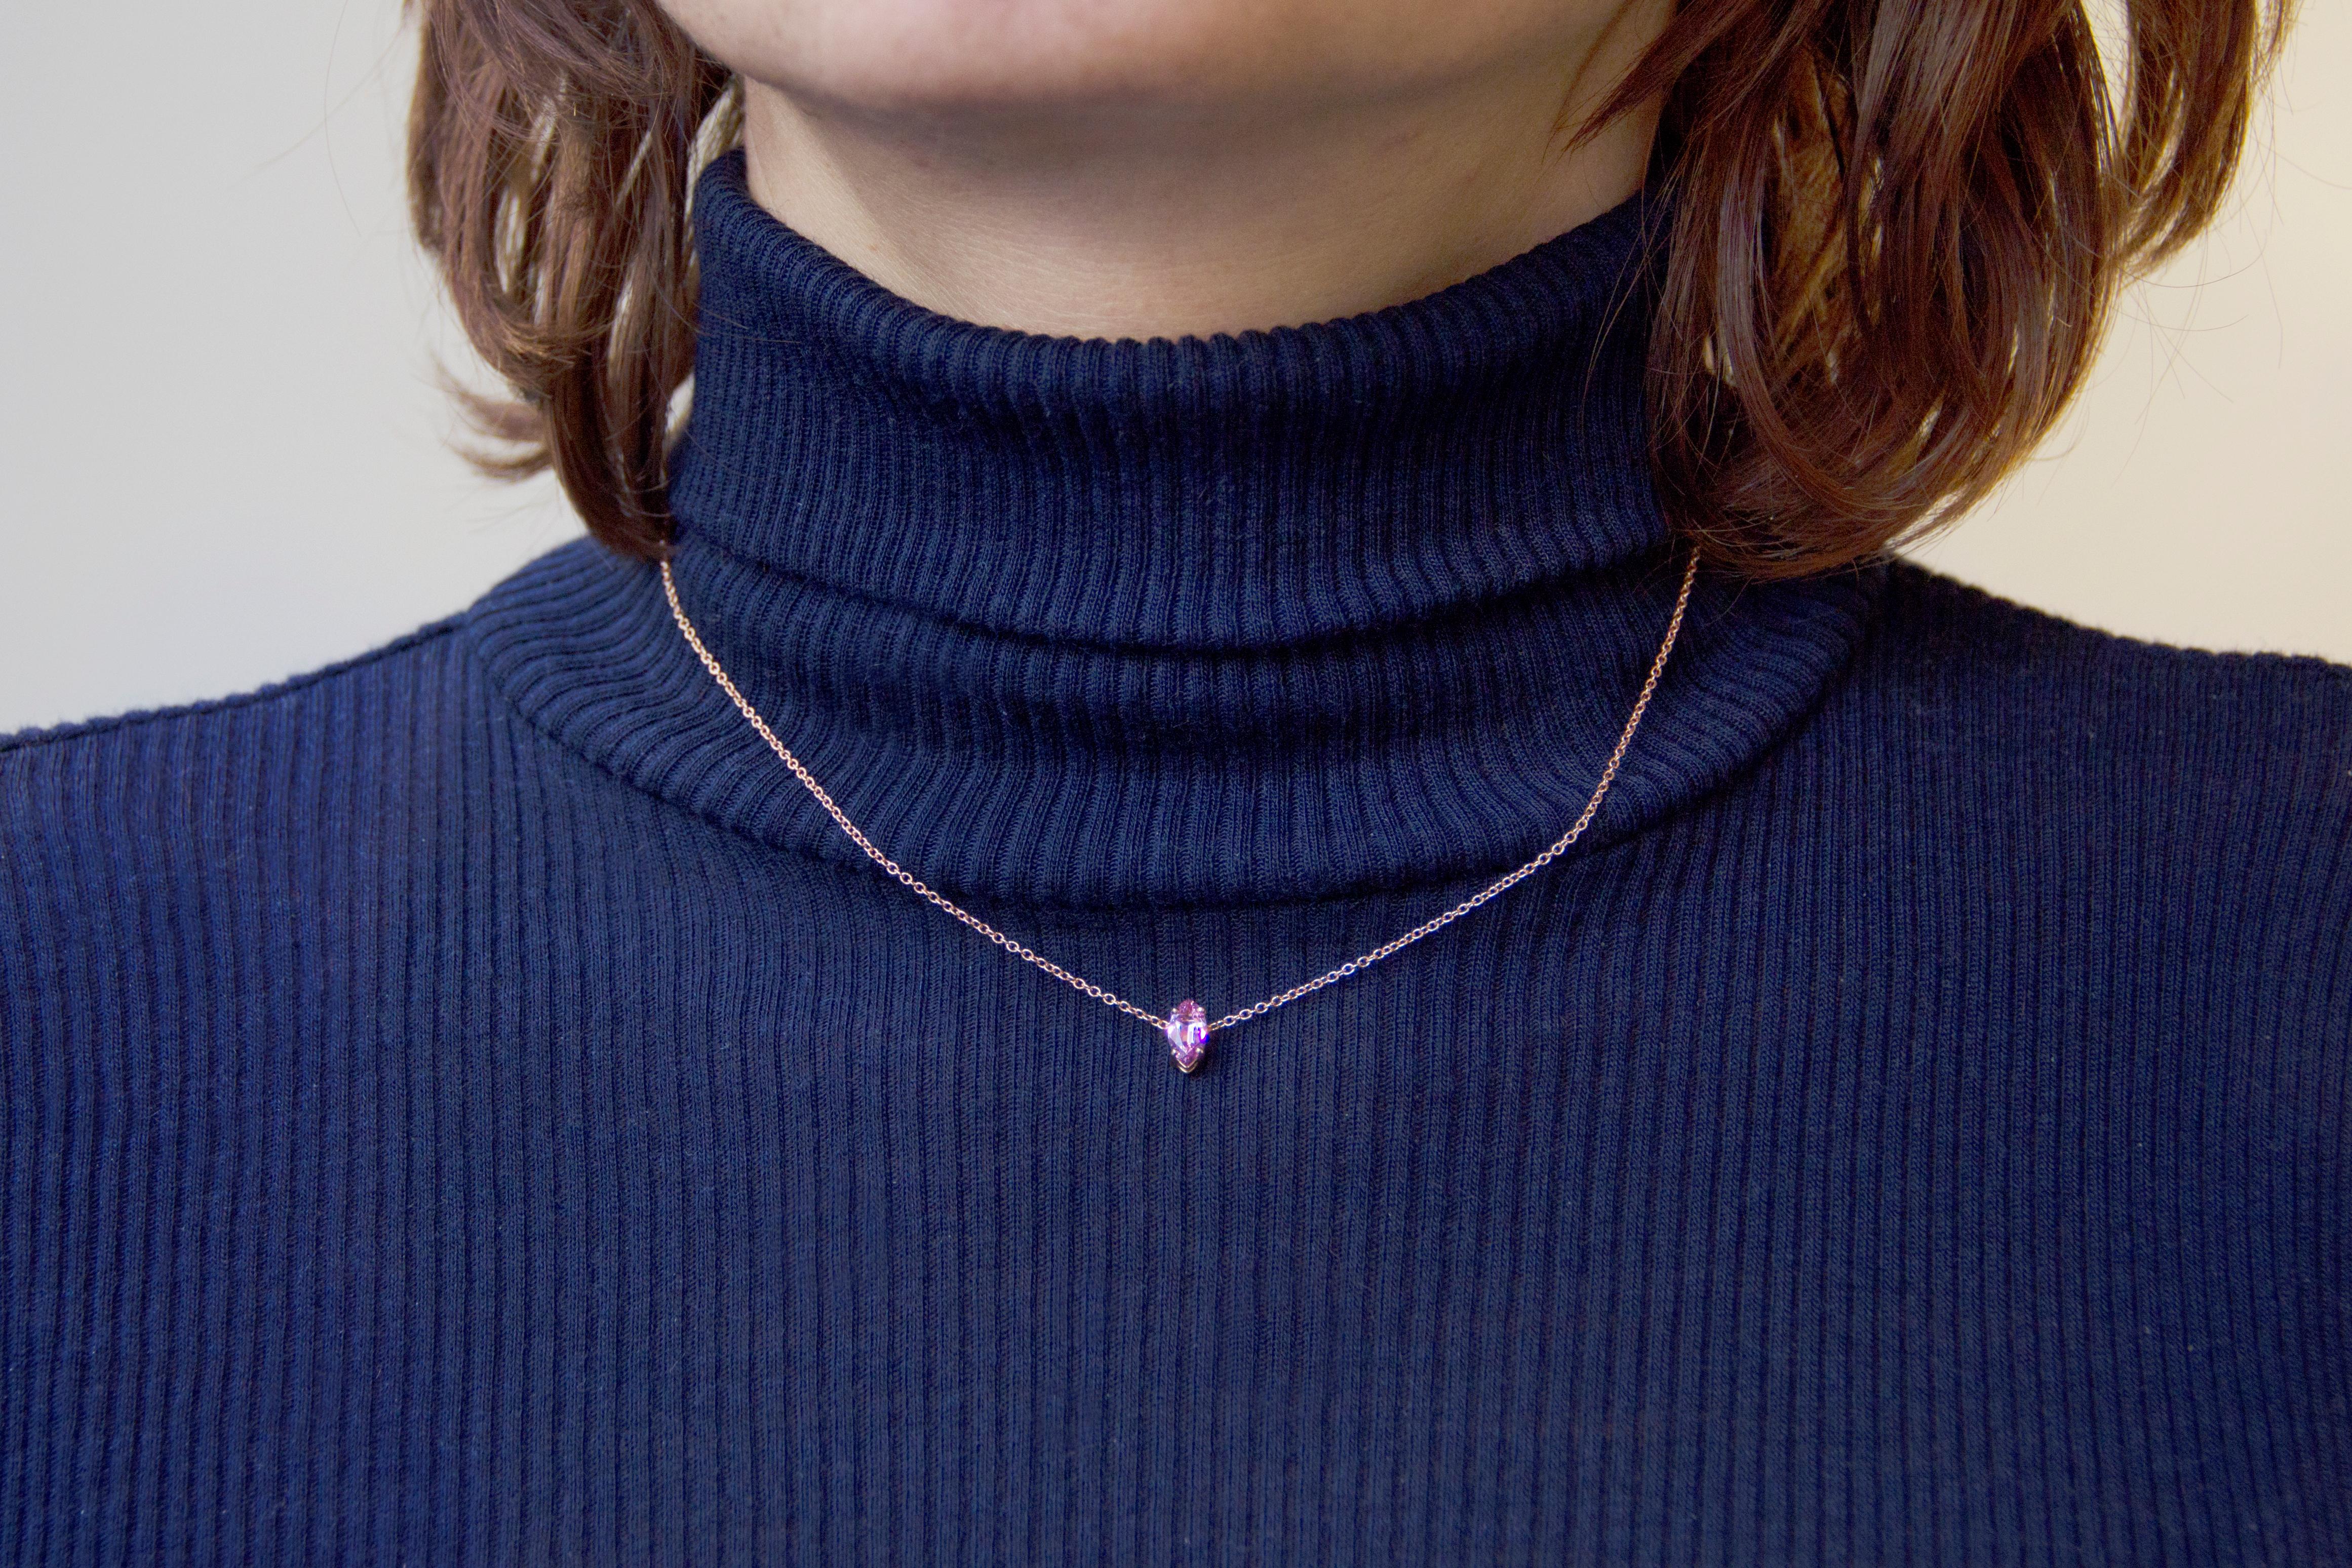 Jona design collection, hand crafted in Italy, marquise cut pink spinel pendant weighing 0.69 carats sliding on a 18 karat rose gold chain (cm 42/16.5 in.) . 
All Jona jewelry is new and has never been previously owned or worn. Each item will arrive